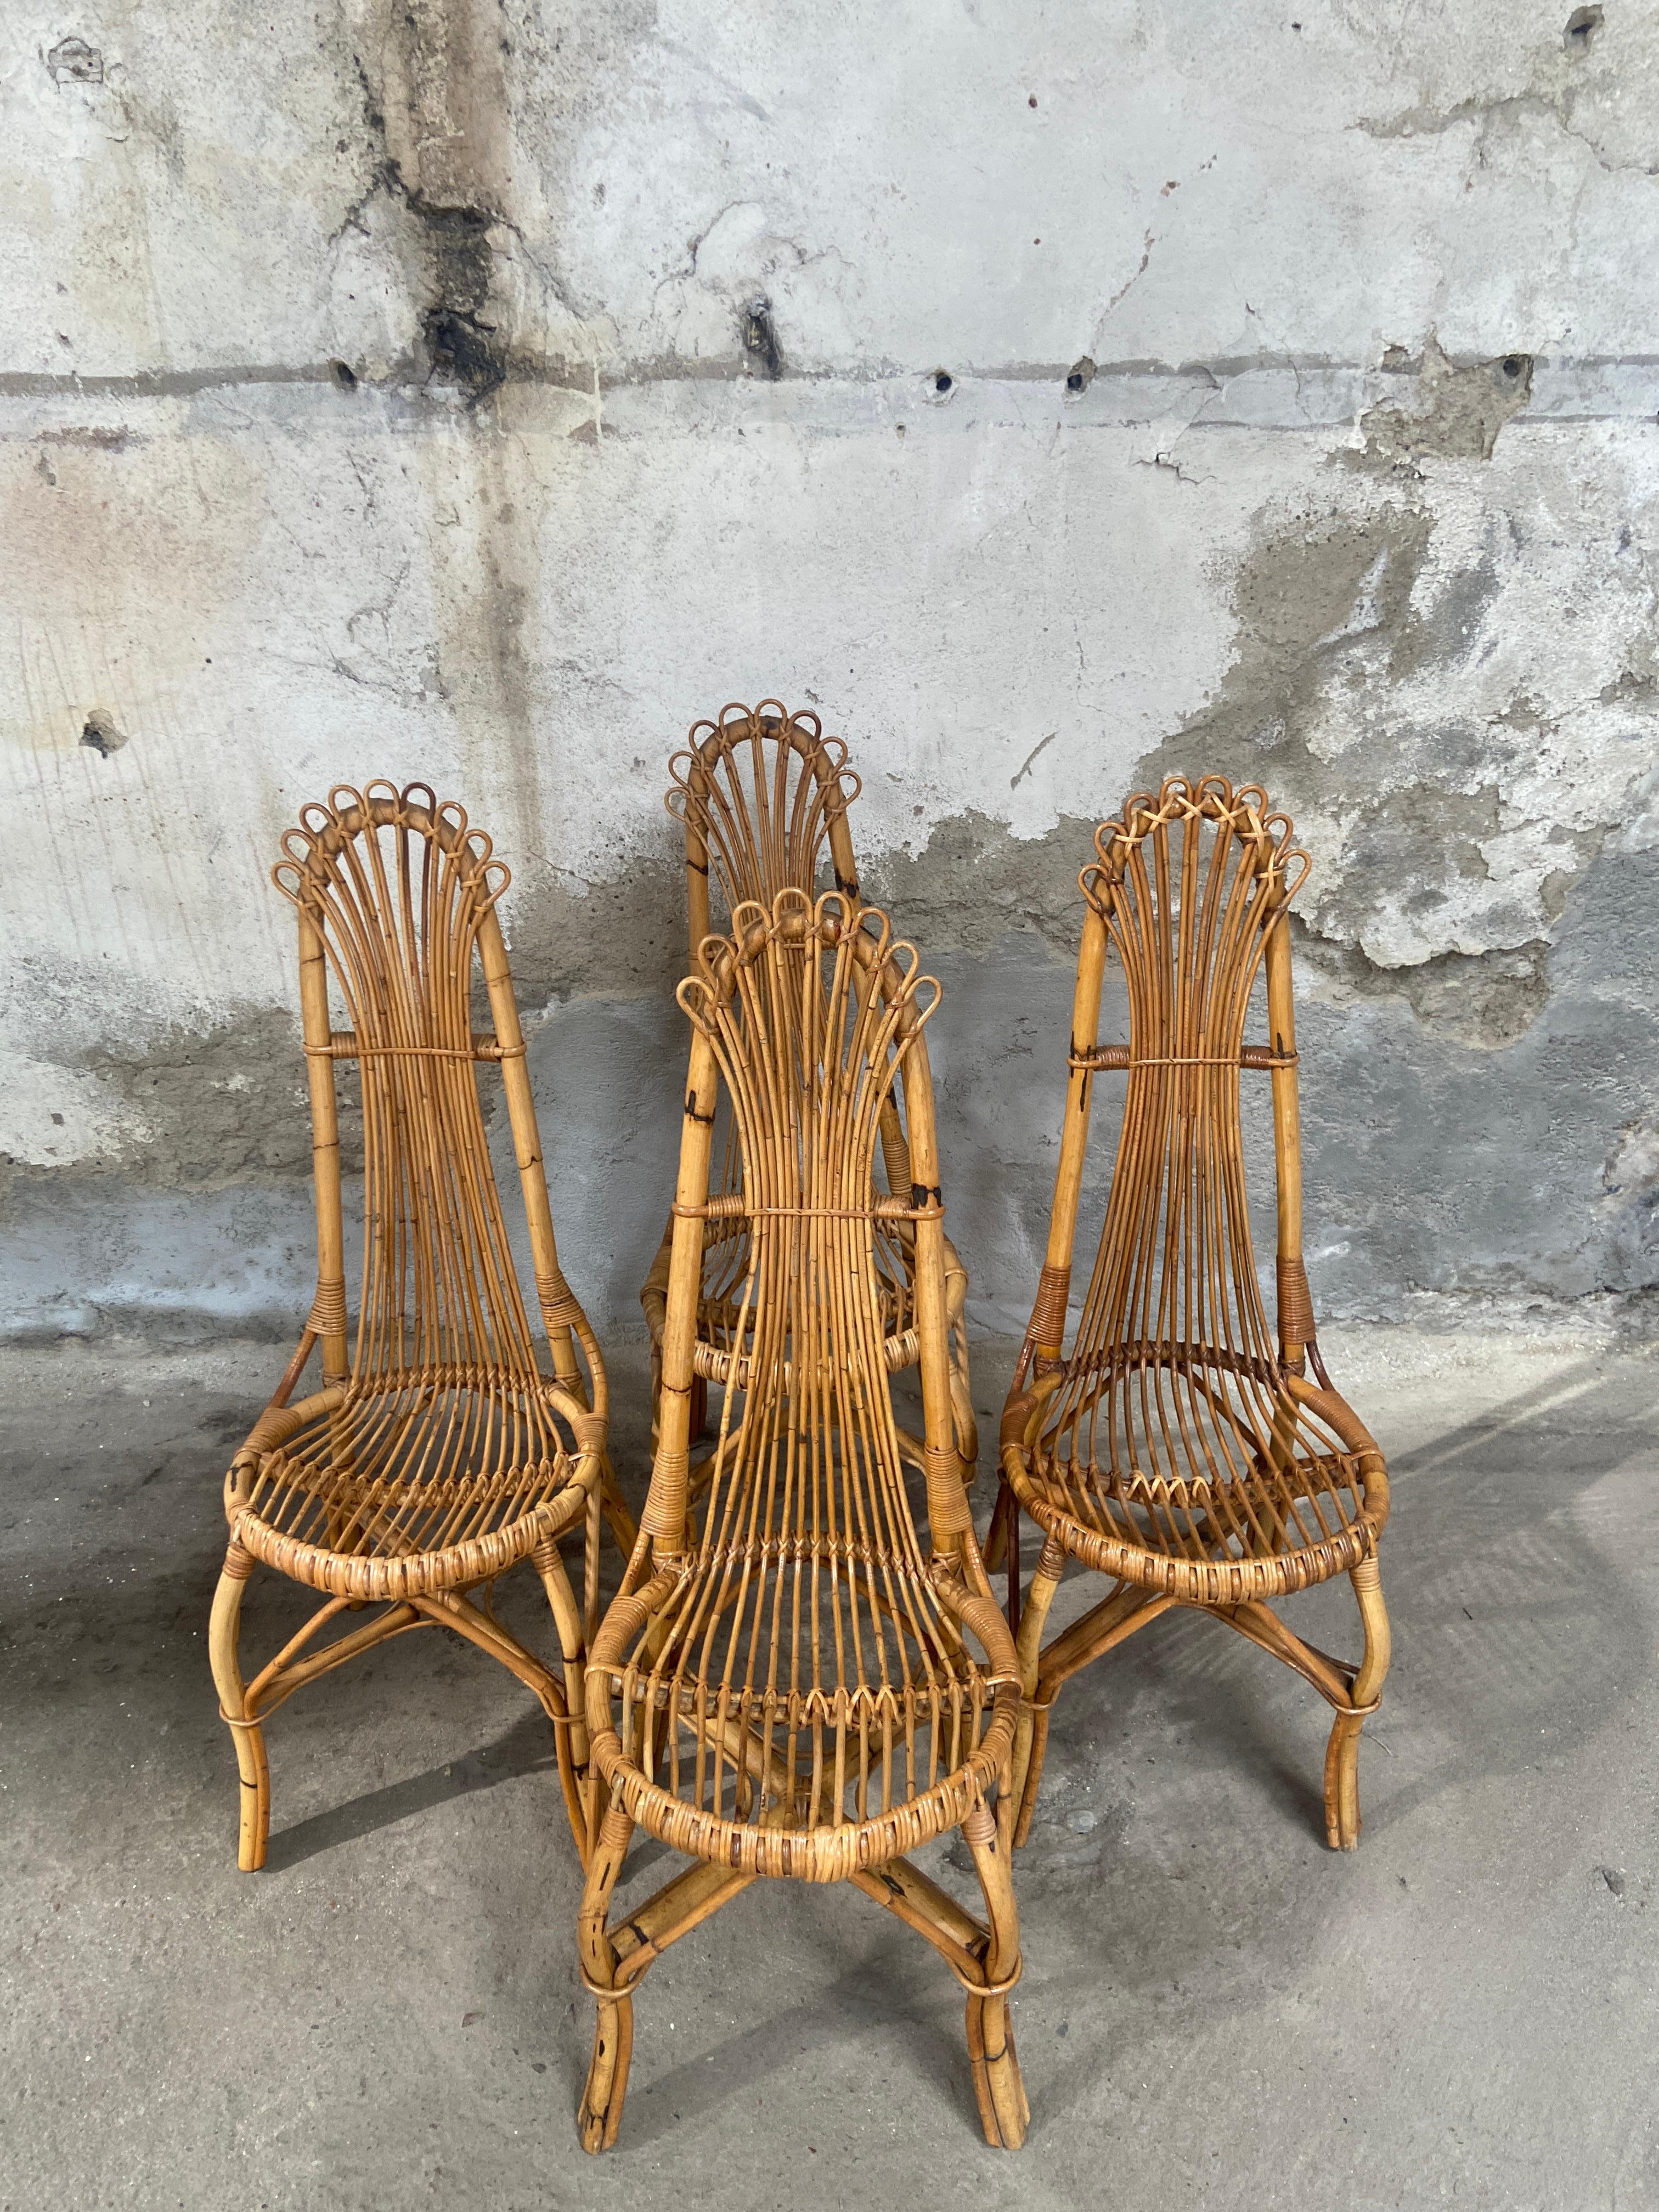 Mid-Century Modern Set of 4 Bamboo Chairs from the French Riviera, 1970s For Sale 2